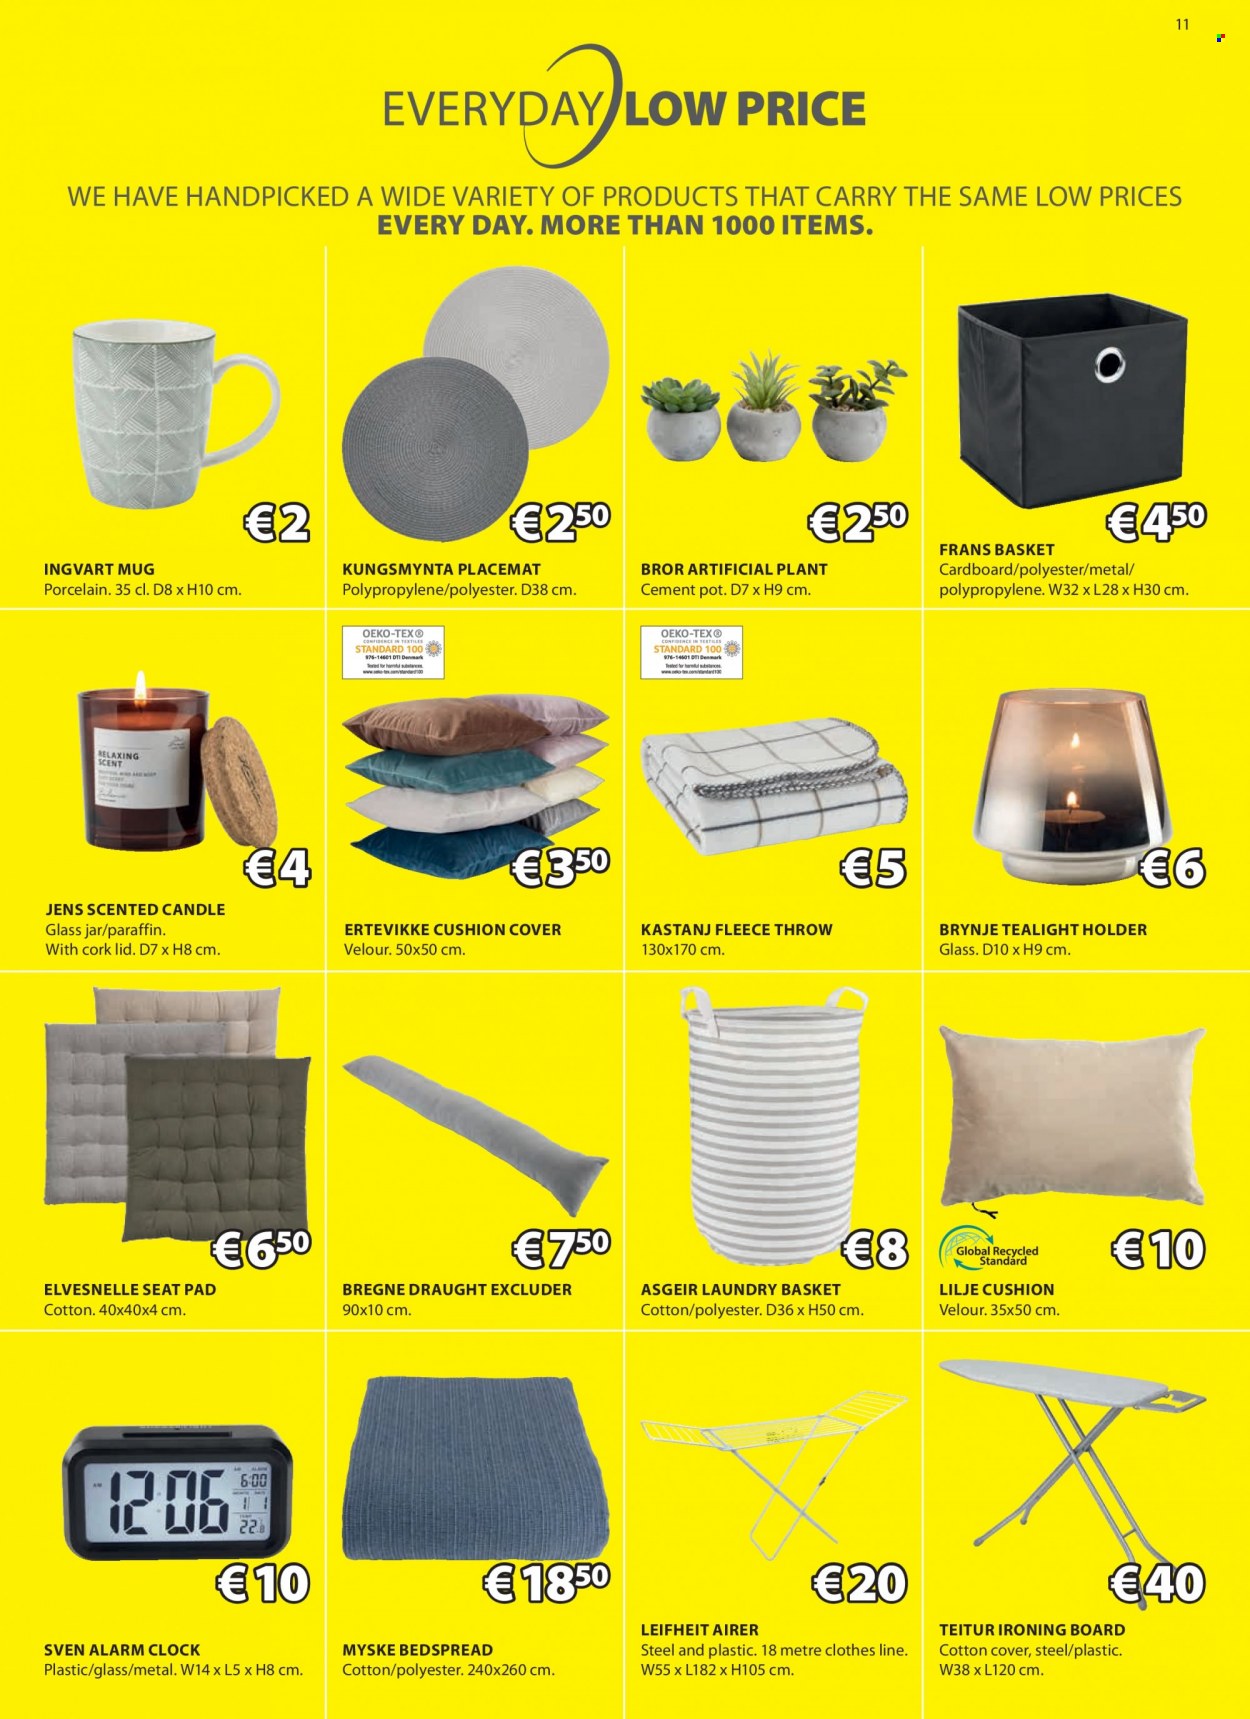 thumbnail - JYSK offer  - 28.11.2022 - 07.12.2022 - Sales products - cushion, tealight holder, placemat, artificial plant, basket, clock, holder, alarm clock, excluder, ironing board, airer, lid, mug, pot, jar, candle, tealight, bedspread, fleece throw. Page 12.